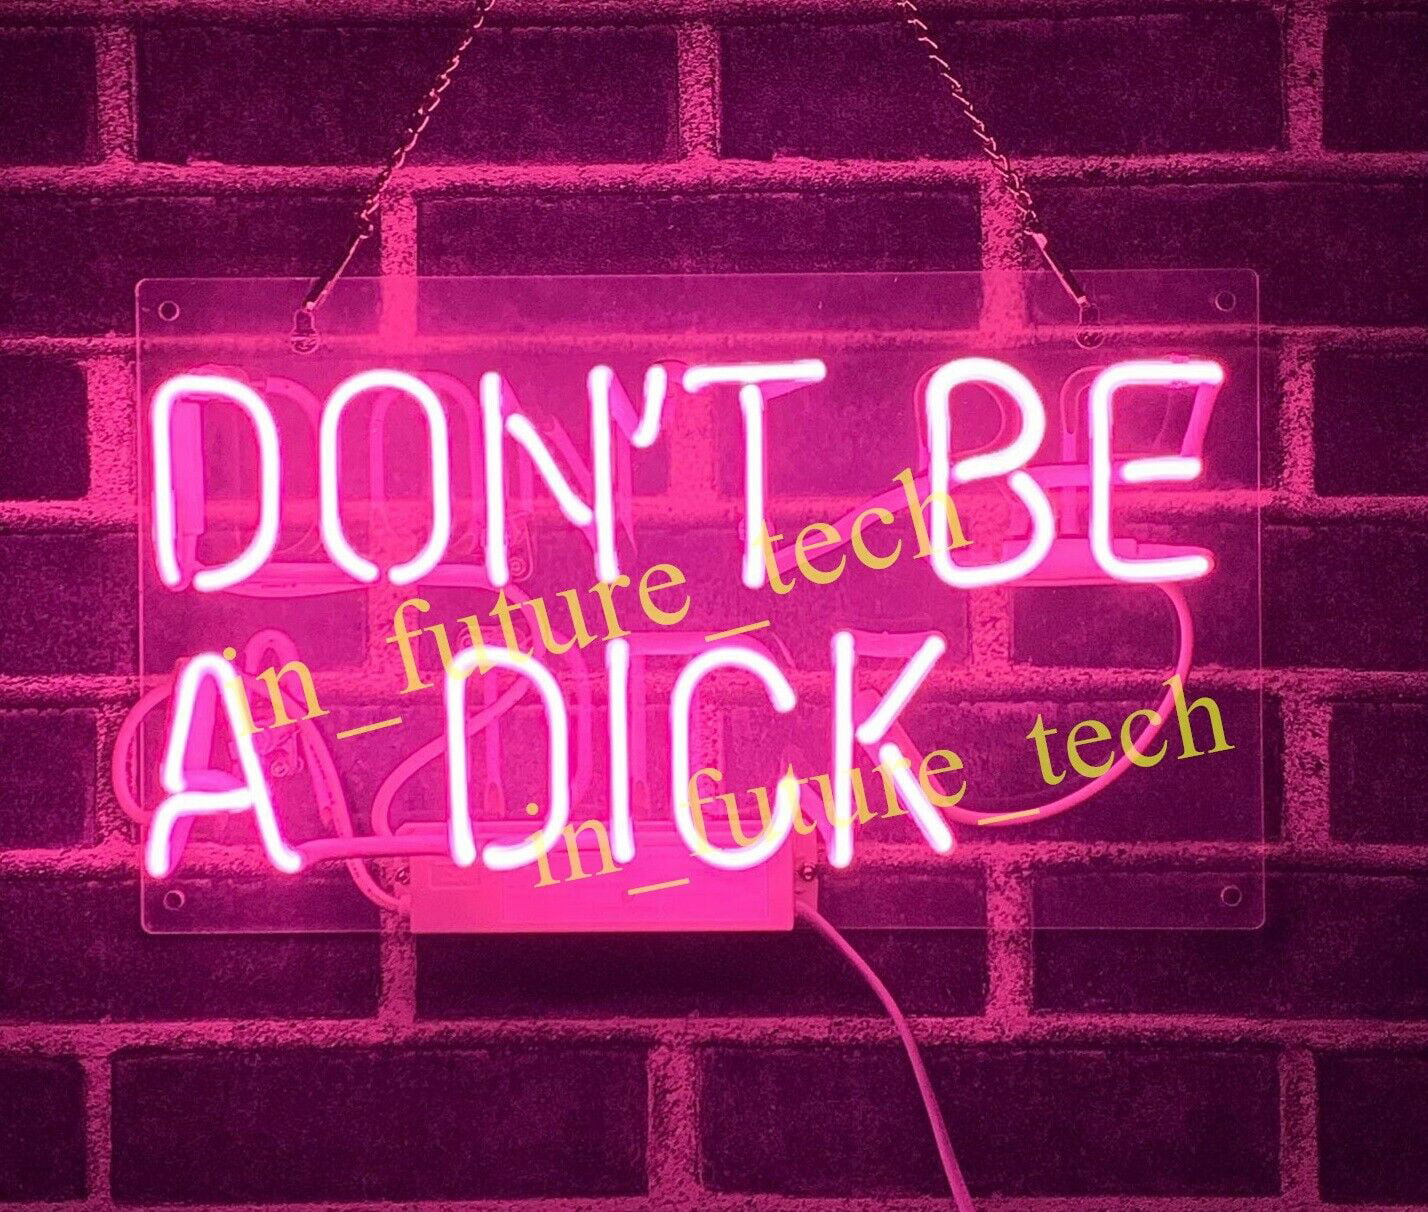 New Don't Be A Dick Acrylic Neon Sign Light Lamp Artwork Display With Dimmer 